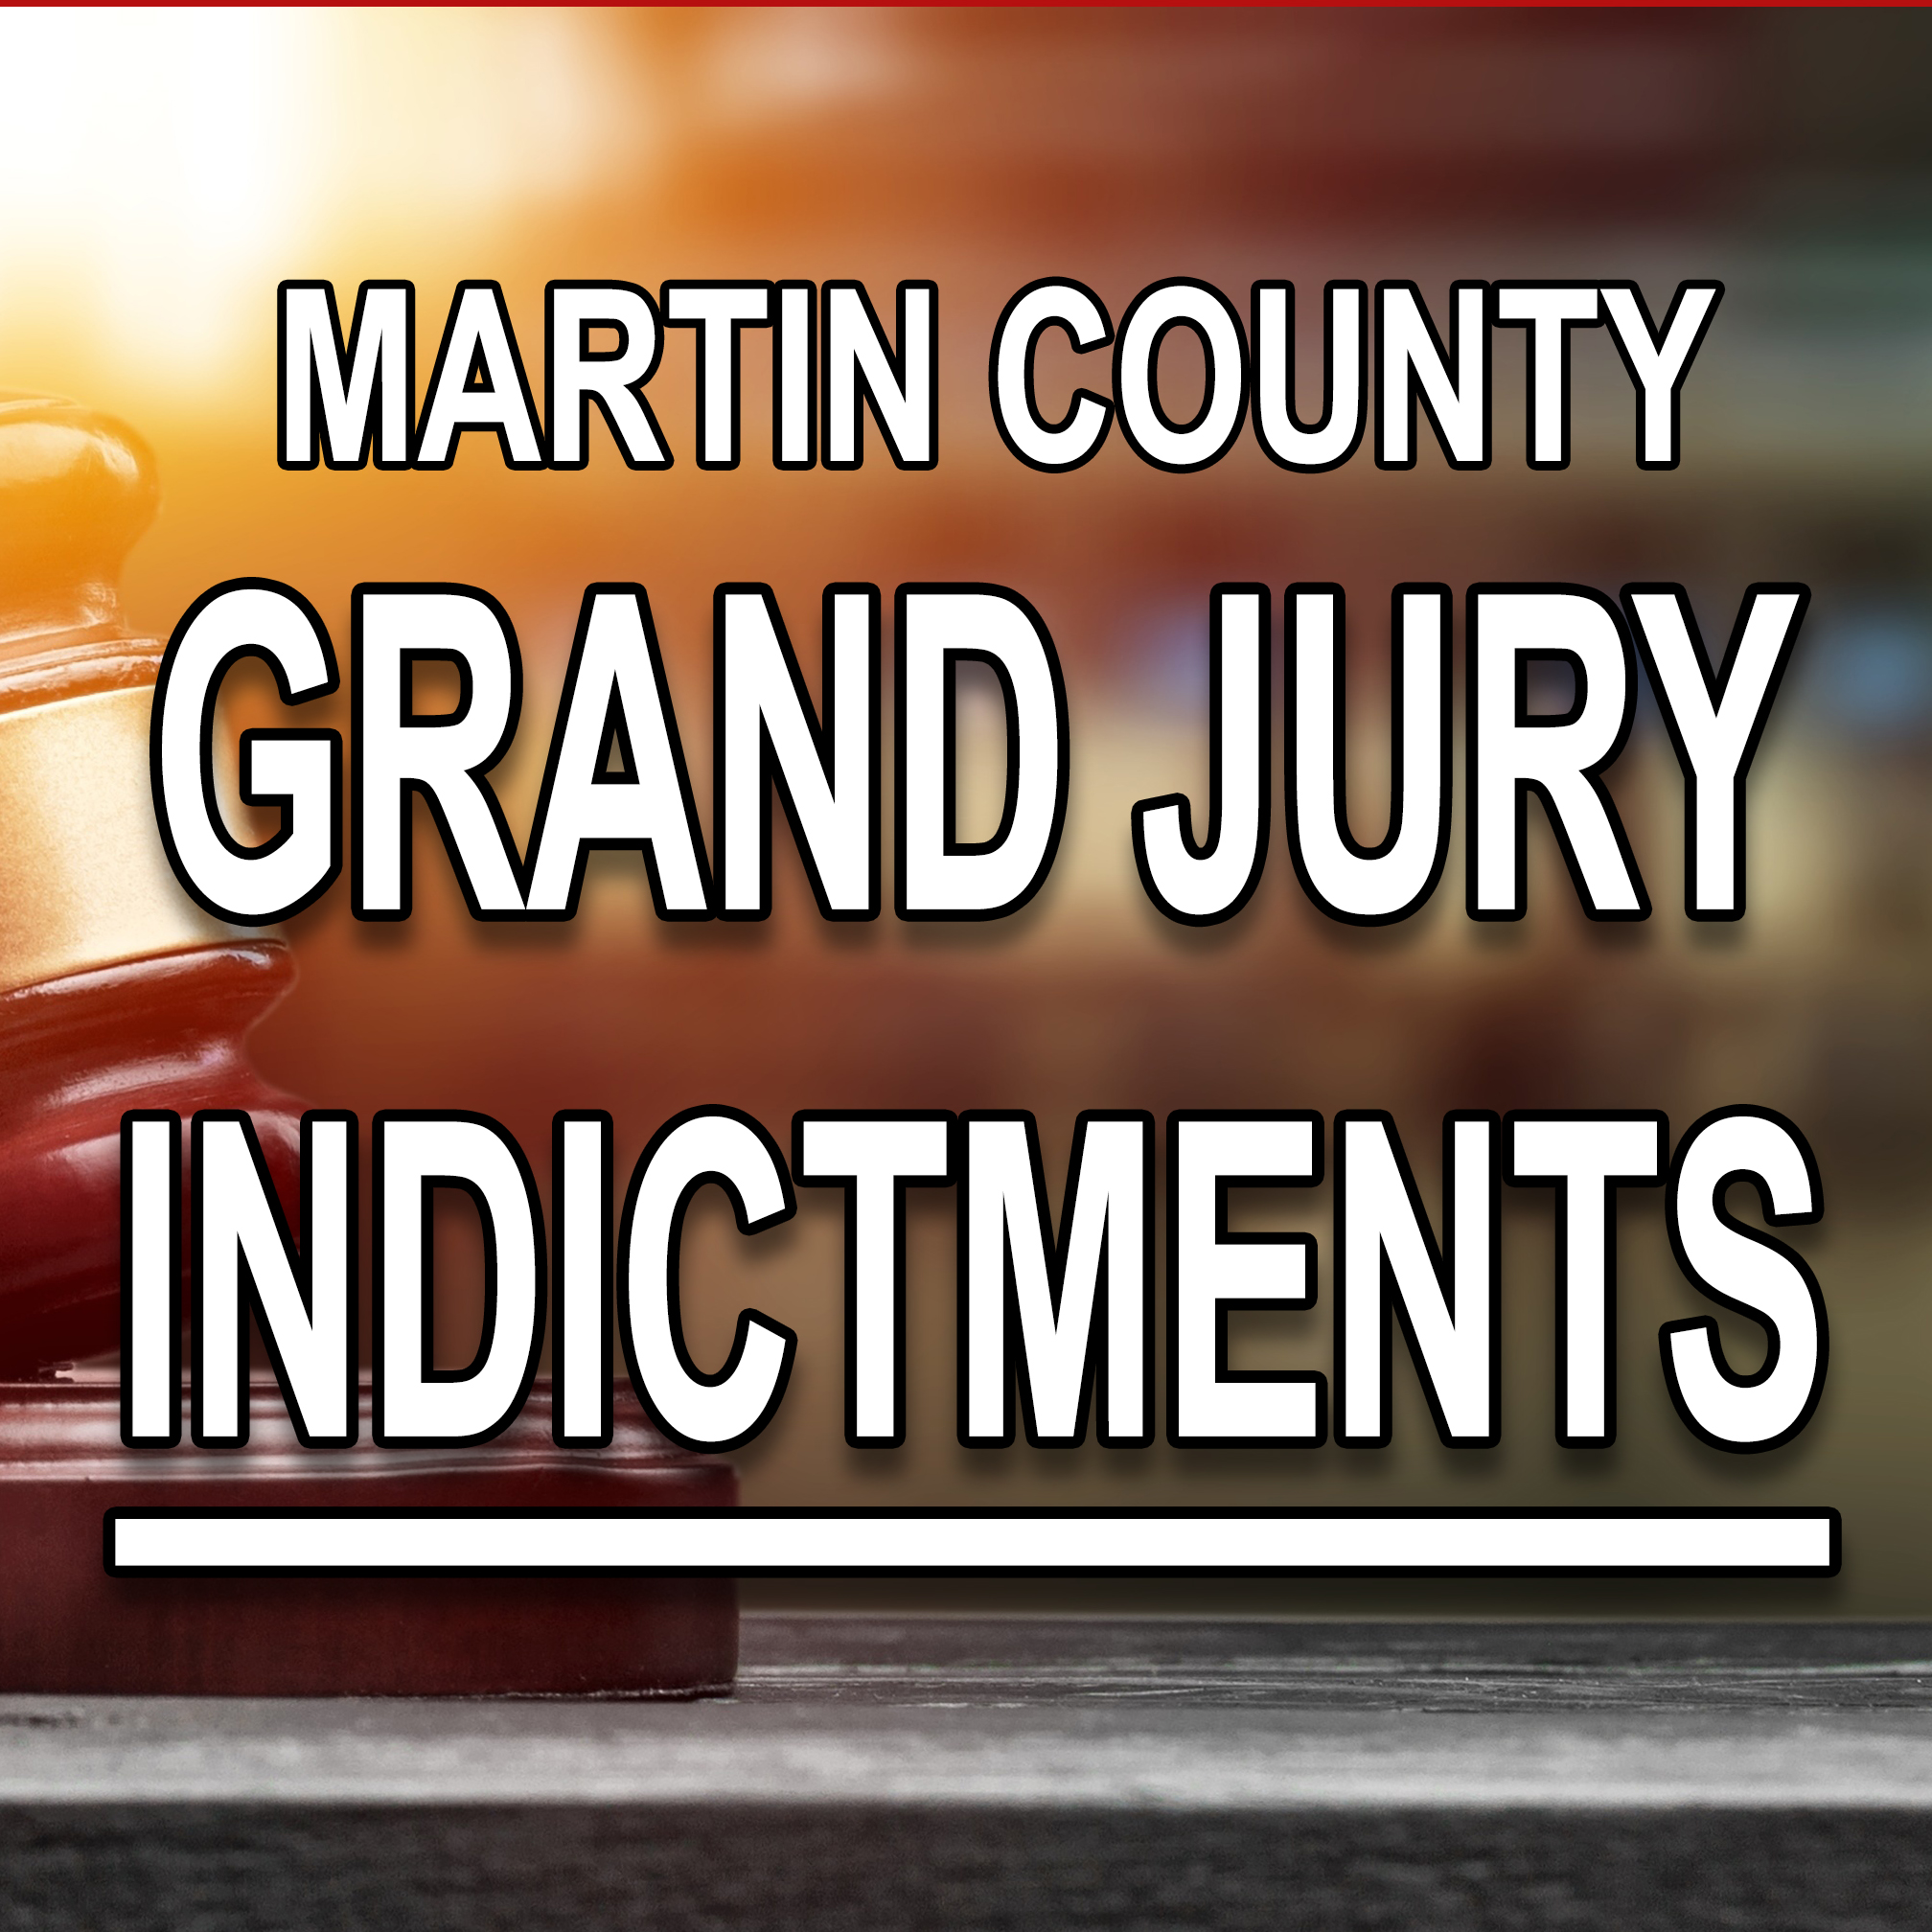 Theft highlights Martin County grand jury indictments